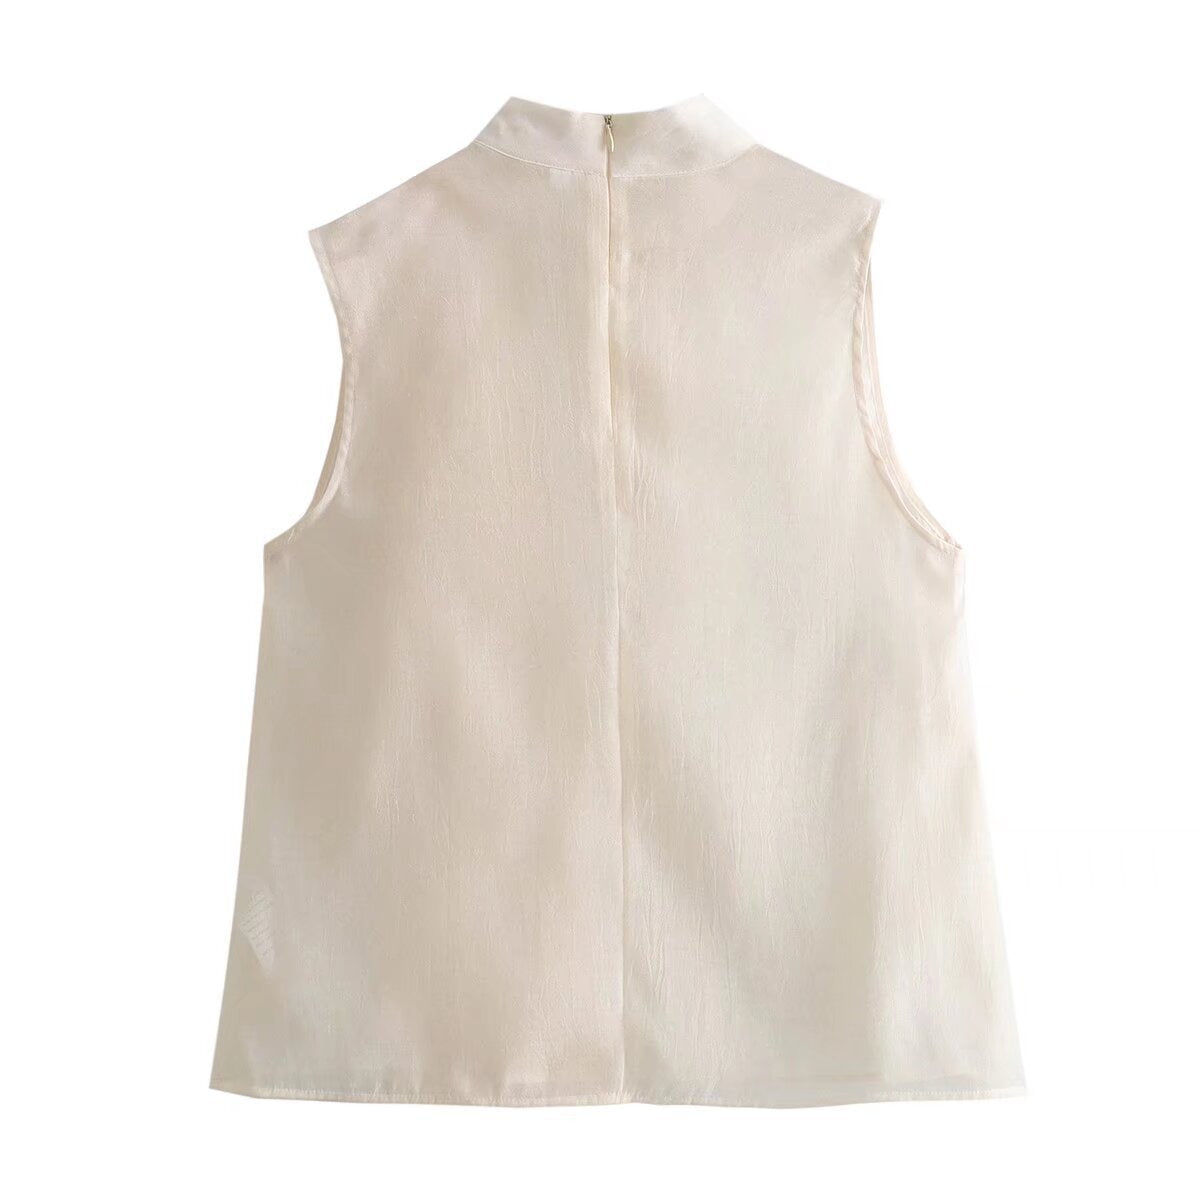 Bowtied- the Sheer Sleeveless Pussy Bow Blouse